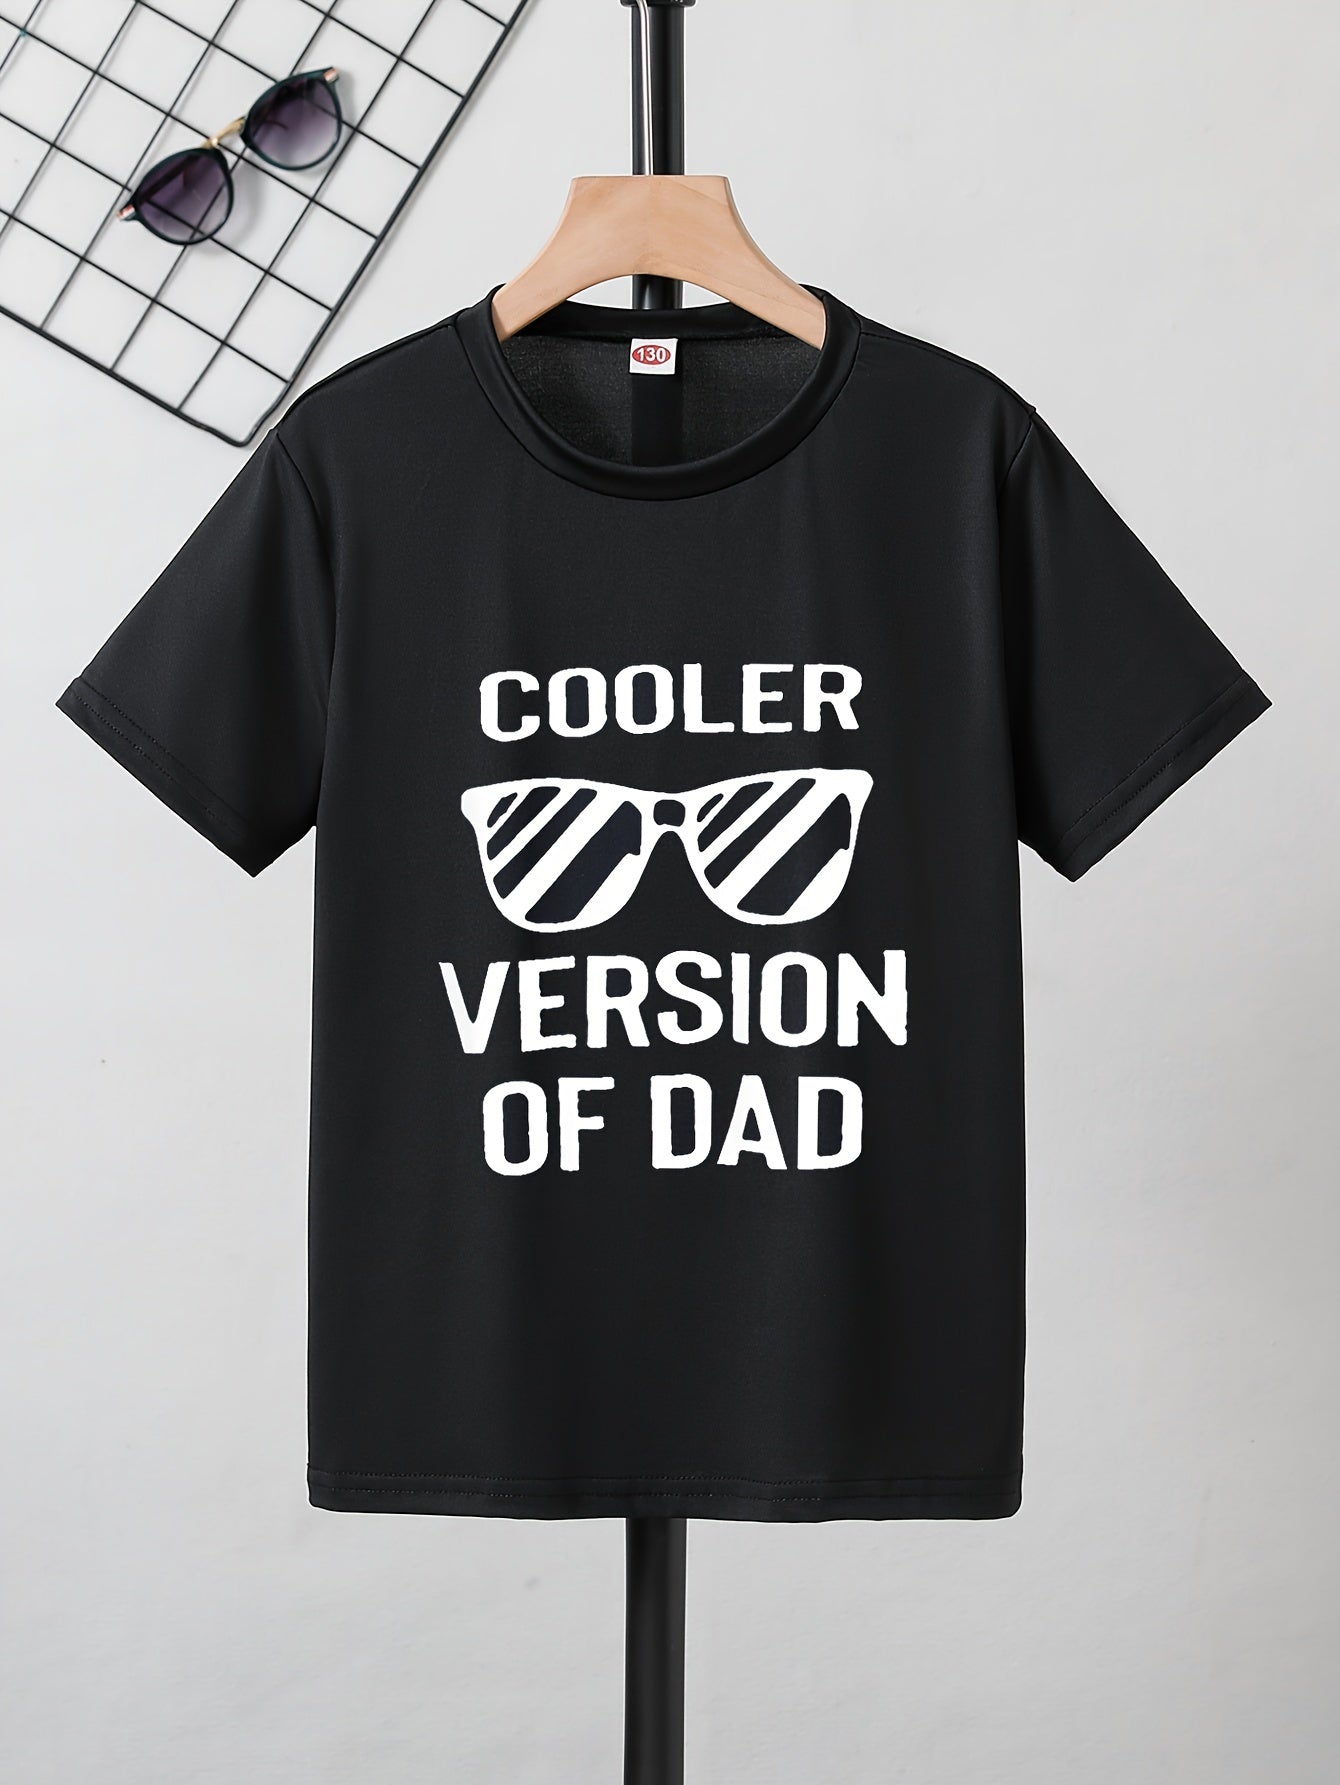 COOLER VERSION OF DAD Letter Print Boys Creative T-shirt, Casual Lightweight Comfy Short Sleeve Tee Tops, Kids Clothes For Summer